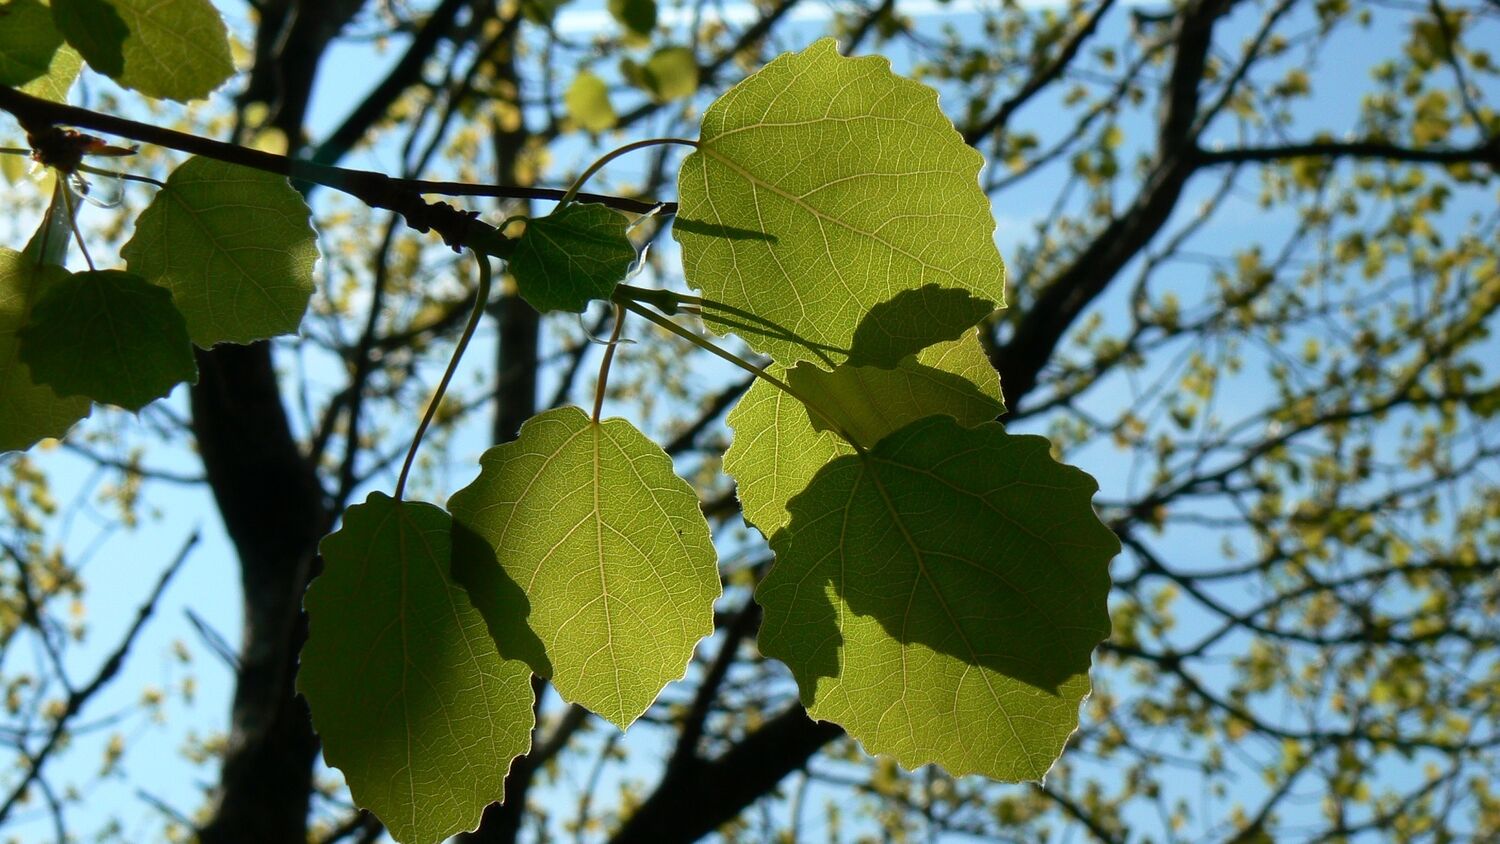 A close-up view of some bright green aspen leaves, with tree branches silhouetted against a clear blue sky behind.